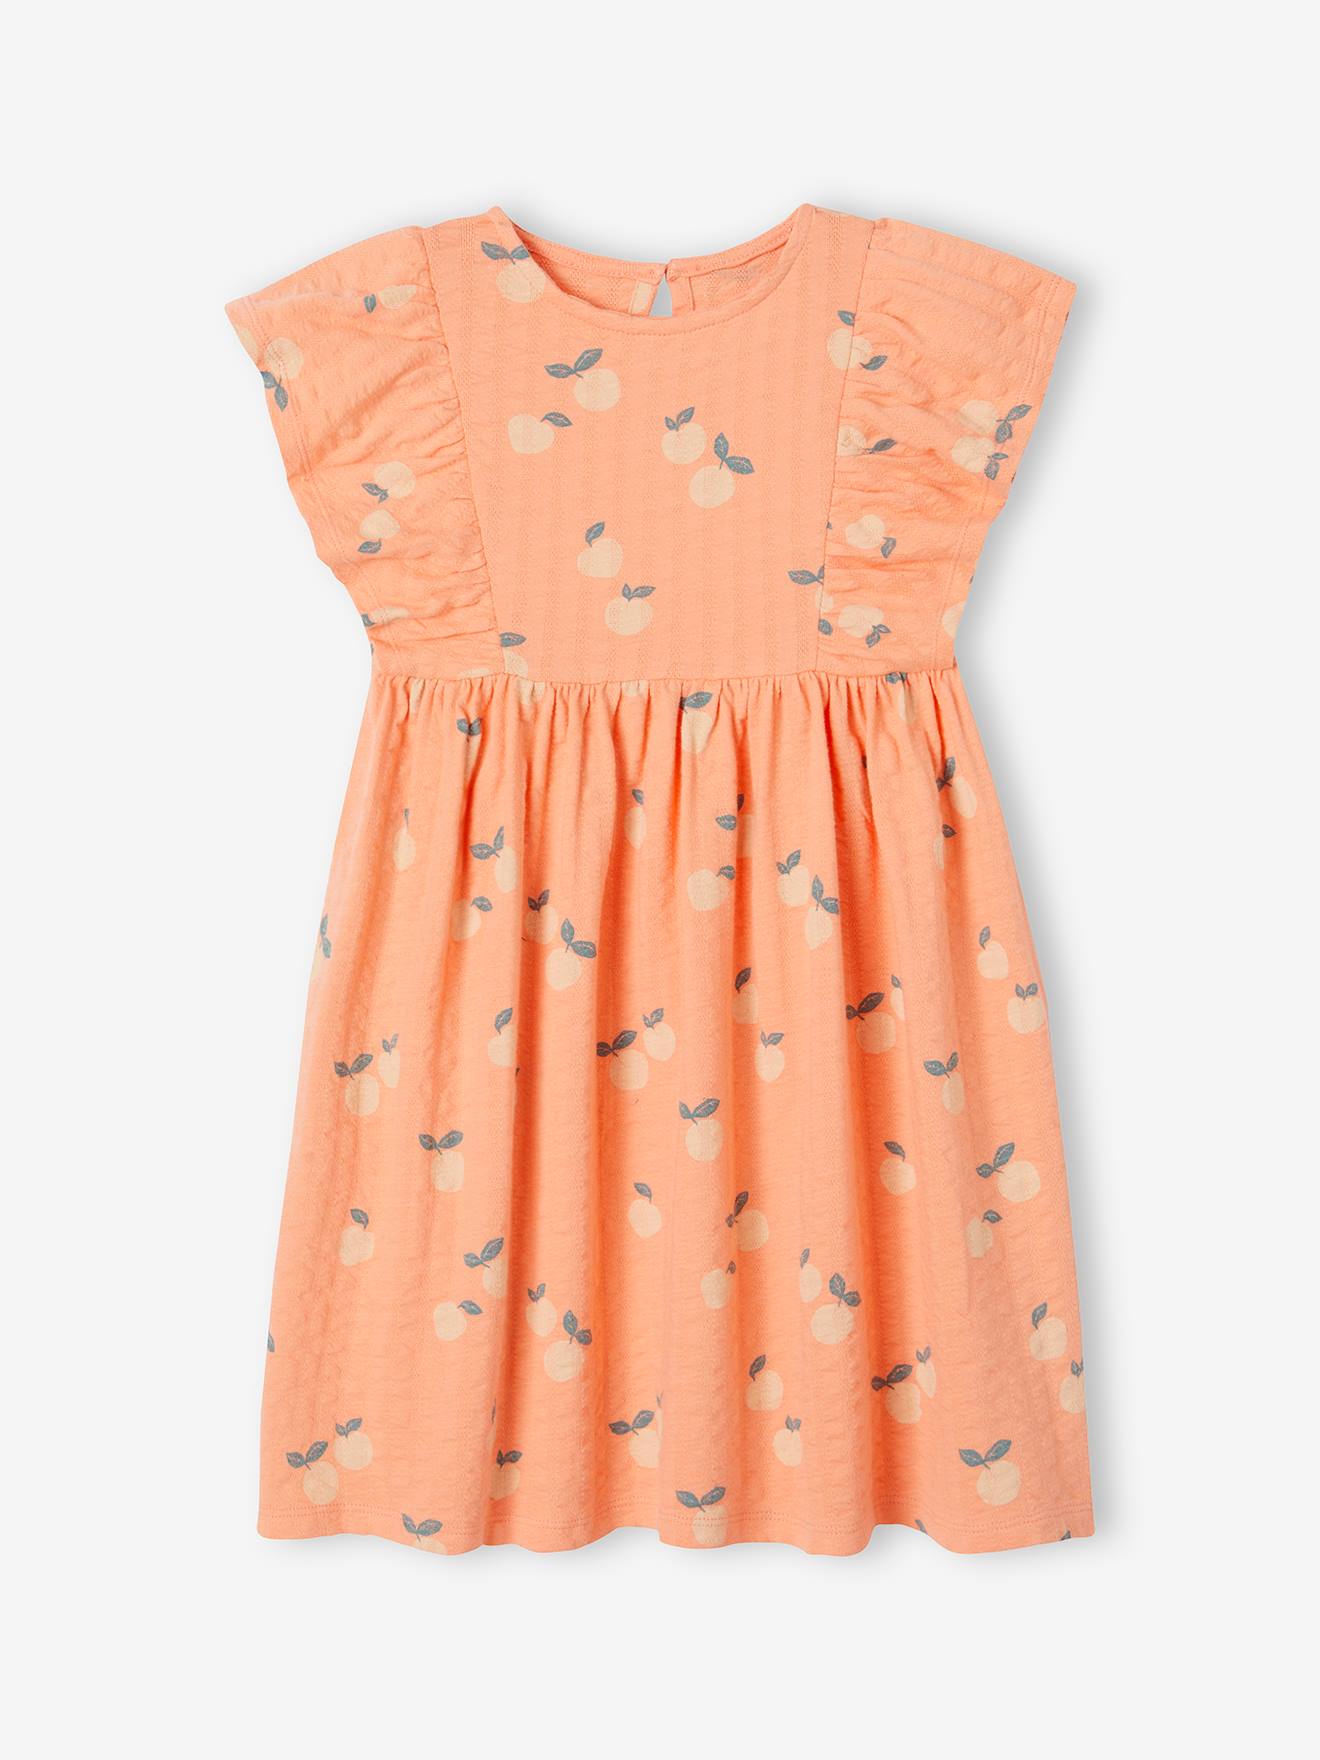 Floral Dress in Jersey Knit with Relief, for Girls tangerine